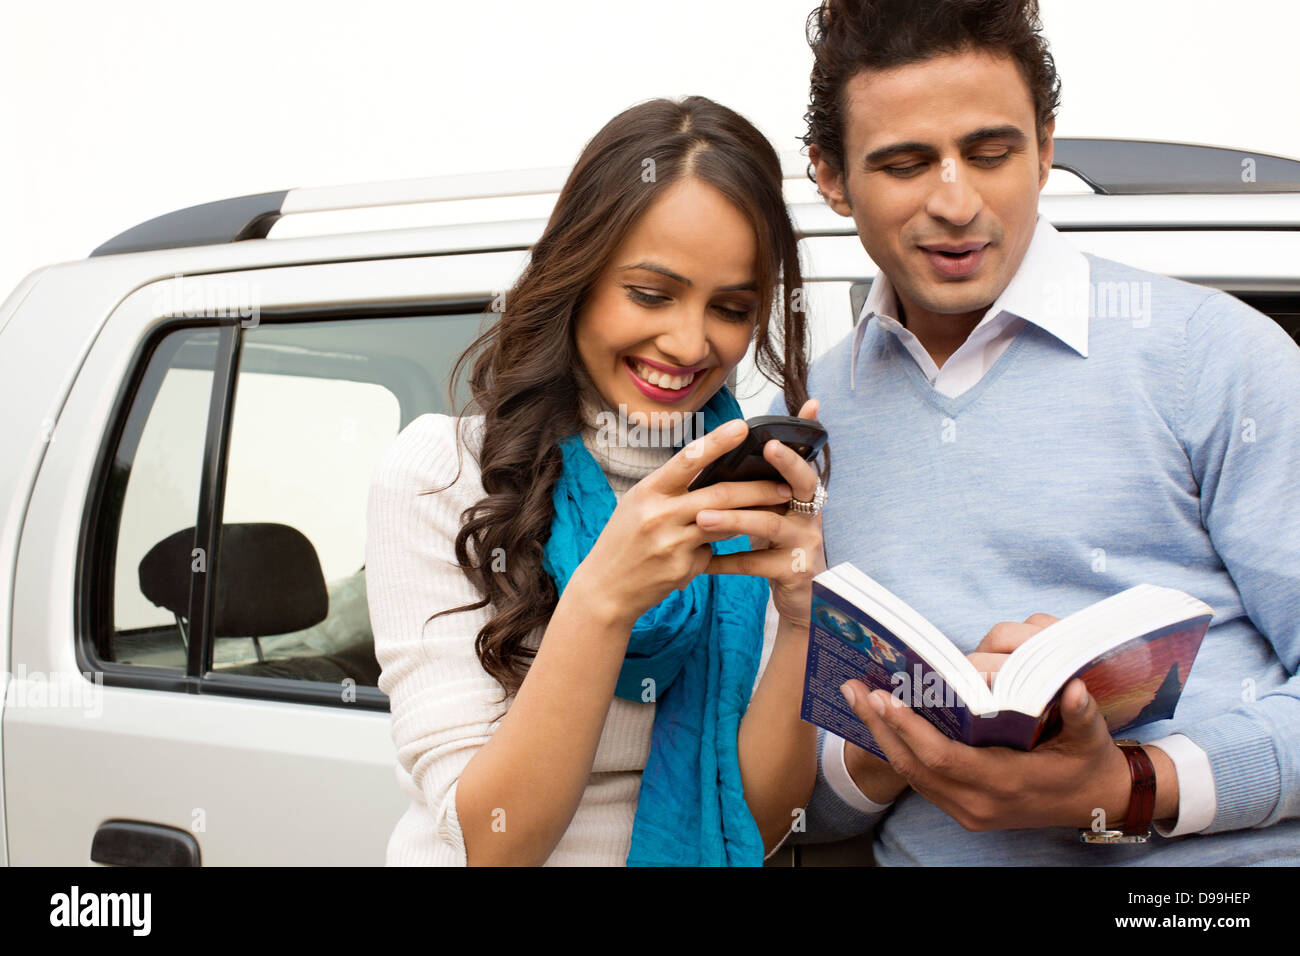 Woman text messaging with a mobile phone and man reading a book Stock Photo